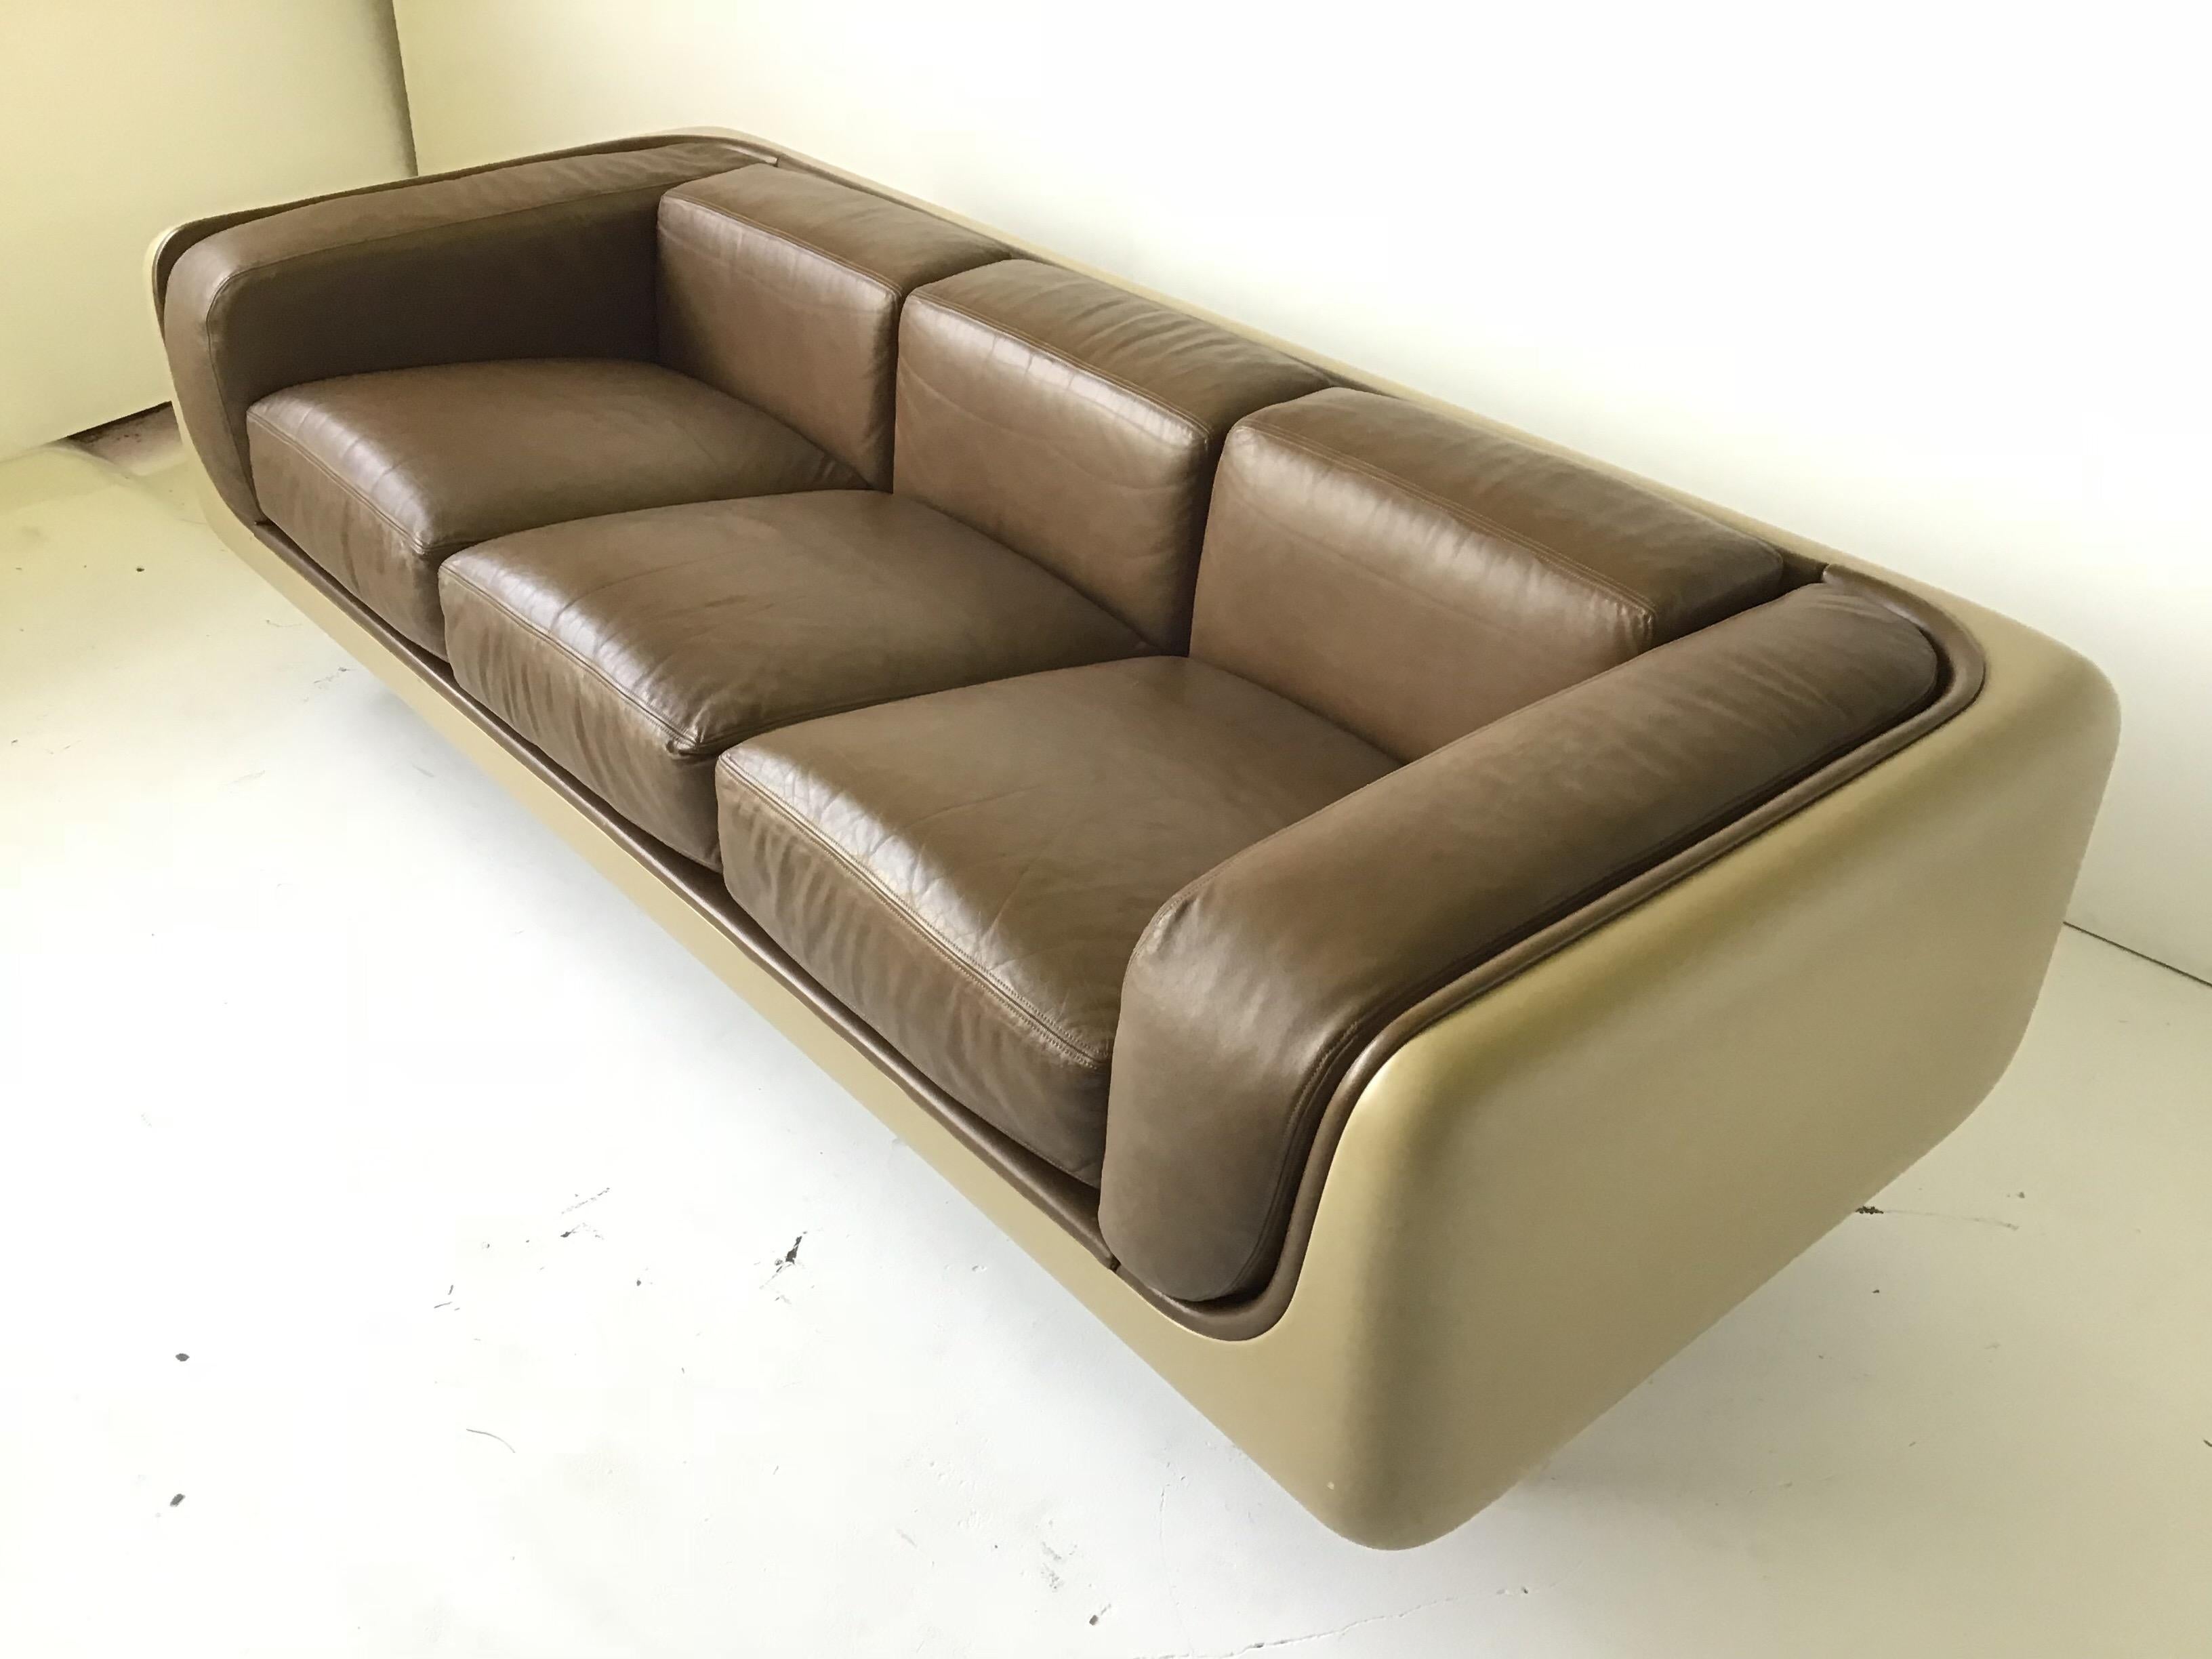 William Andrus Steelcase Leather Sofa In Excellent Condition For Sale In Tulsa, OK